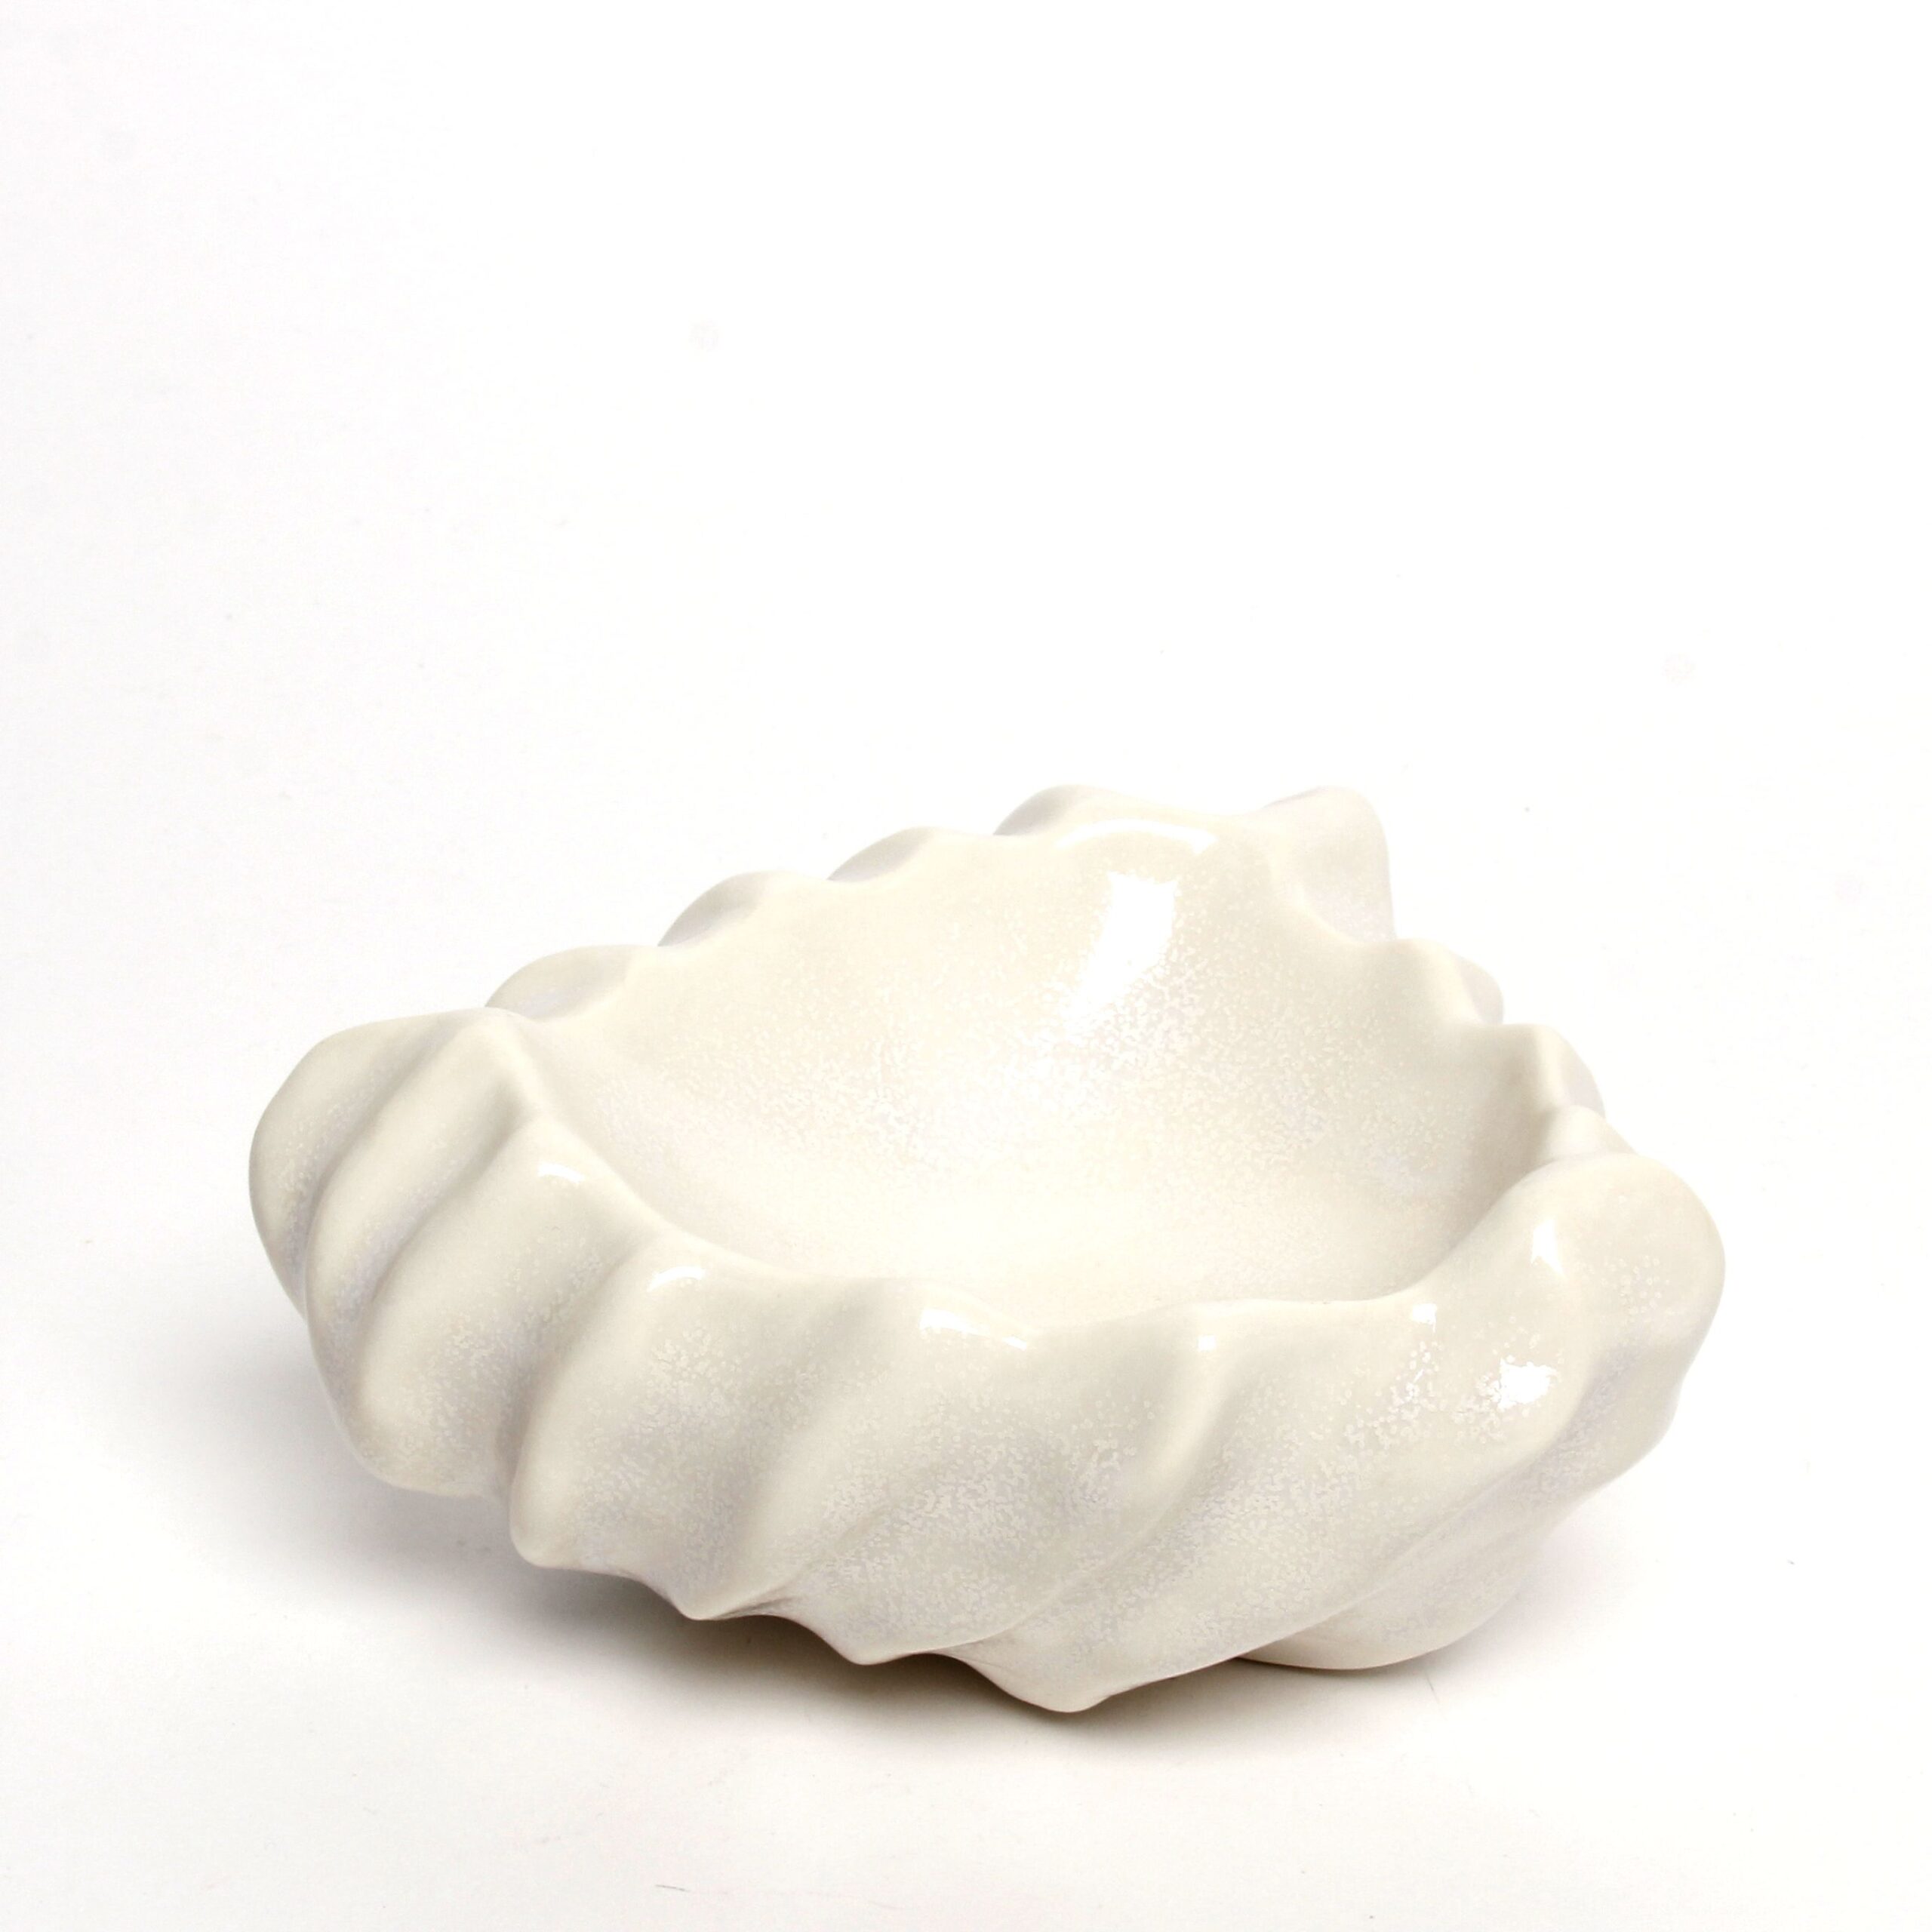 William Lee: Triangle Bowl in White Product Image 3 of 3